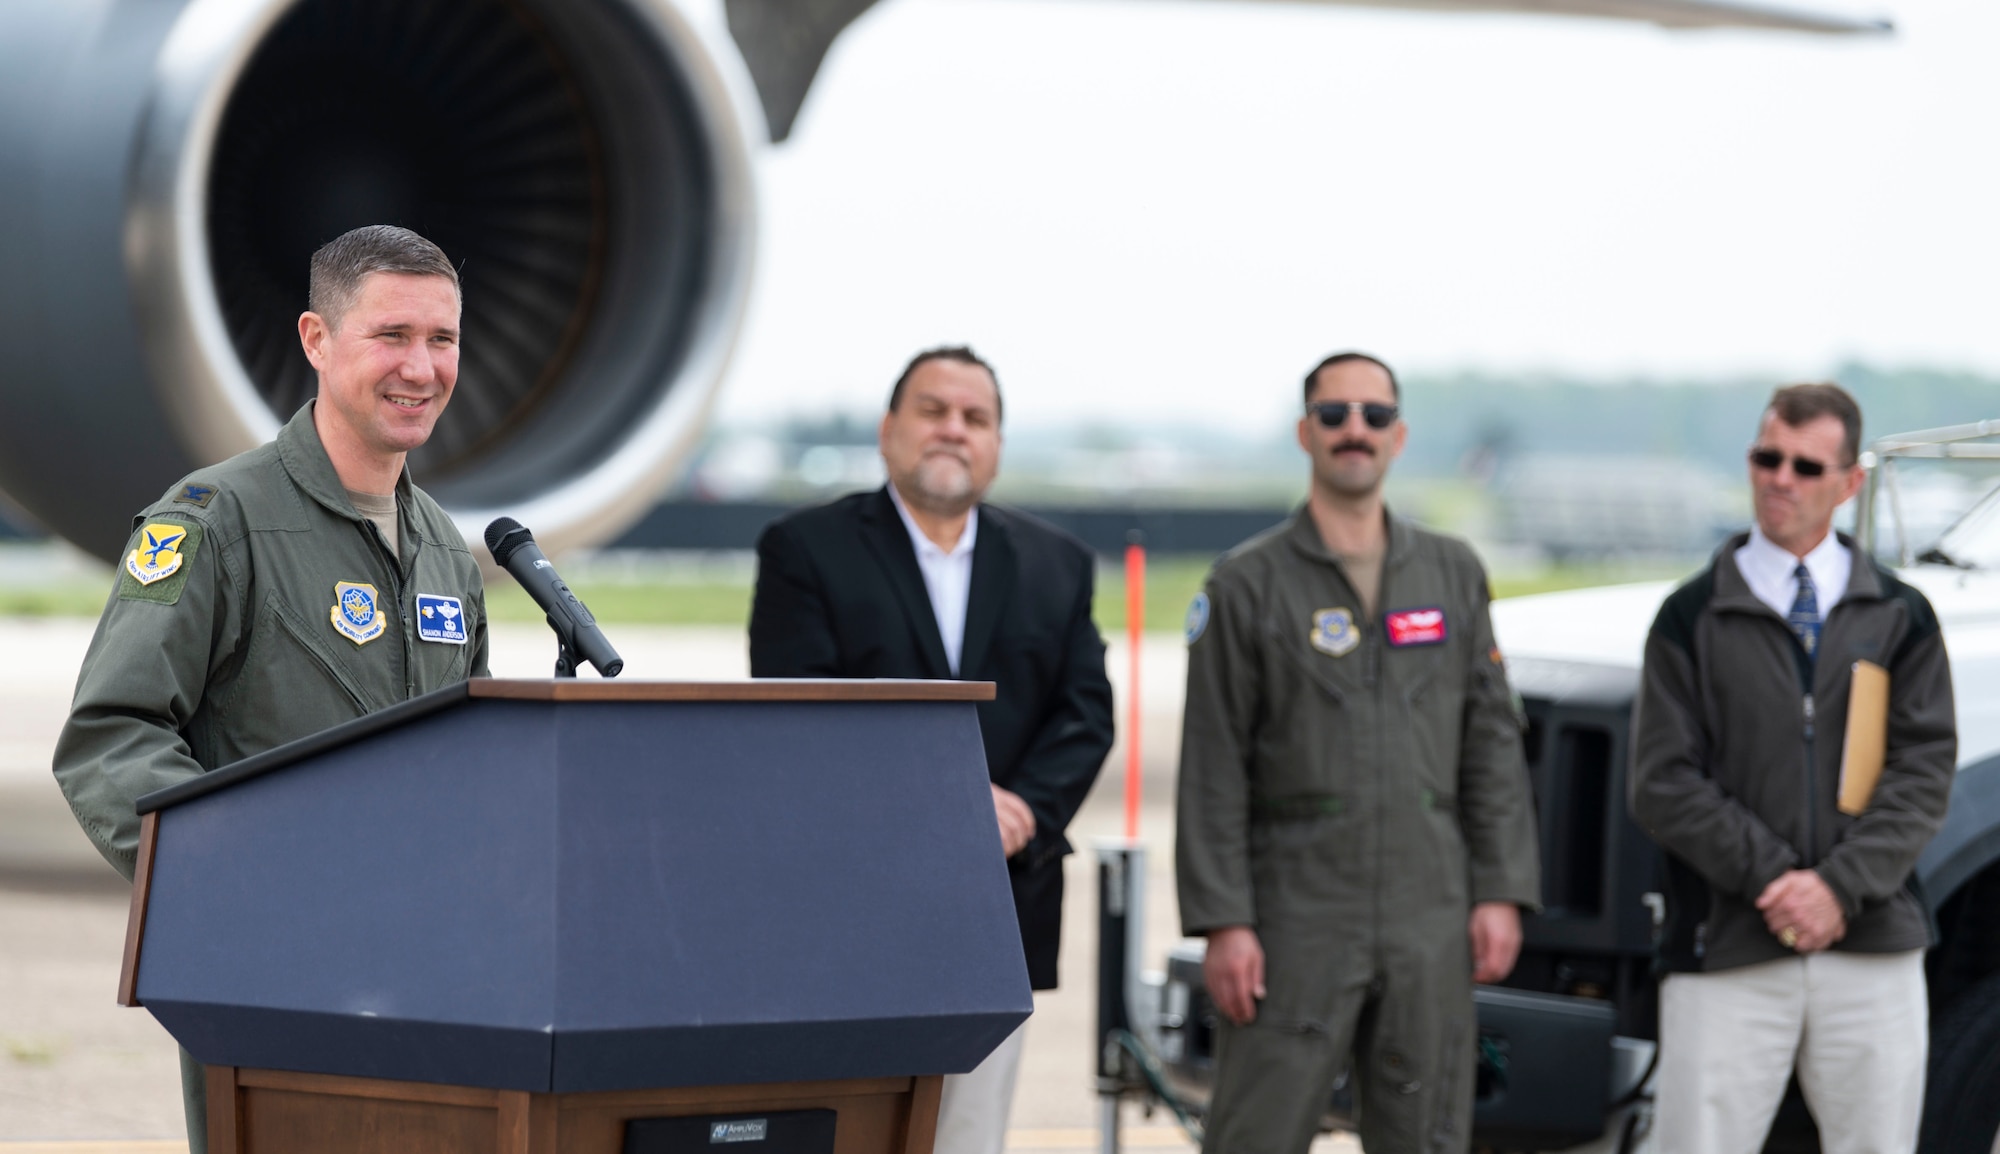 Col. Shanon Anderson, 436th Airlift Wing vice commander, speaks to attendees after the arrival of a KC-10A Extender at the Air Mobility Command Museum on Dover Air Force Base, Delaware, April 26, 2022. Anderson logged his first and 104th combat mission on this exact aircraft. The aircraft was retired to Dover AFB from Joint Base McGuire-Dix-Lakehurst, New Jersey, to become the 36th addition to the AMC Museum. (U.S. Air Force photo by Roland Balik)